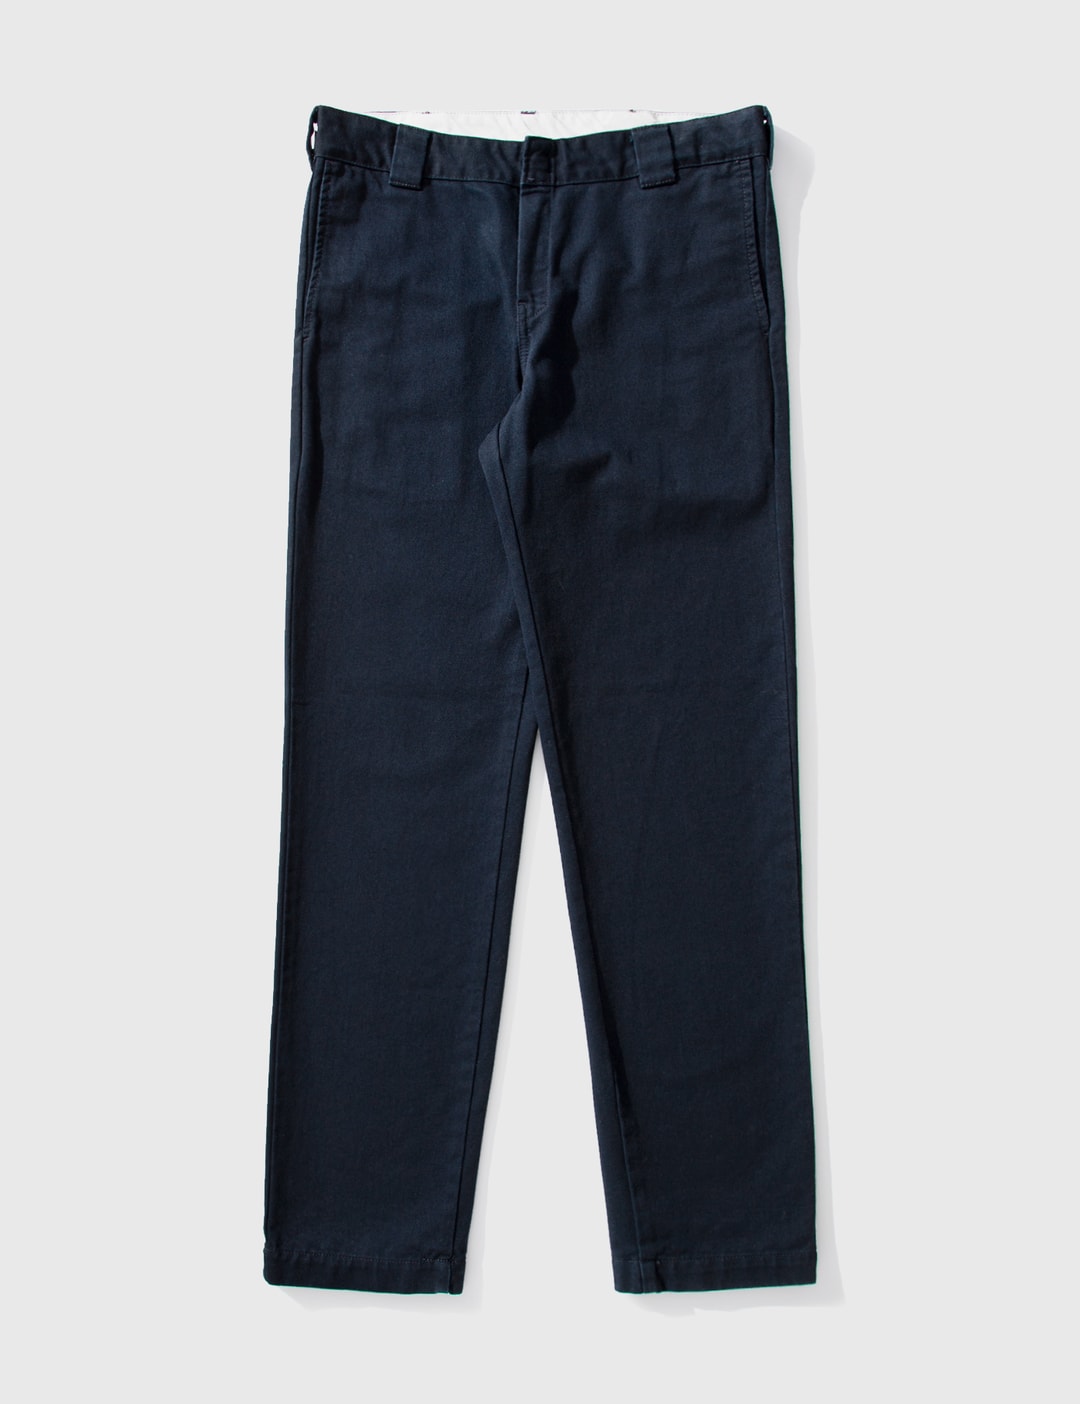 Carhartt Work In Progress - Master Pants | HBX - Globally Curated ...